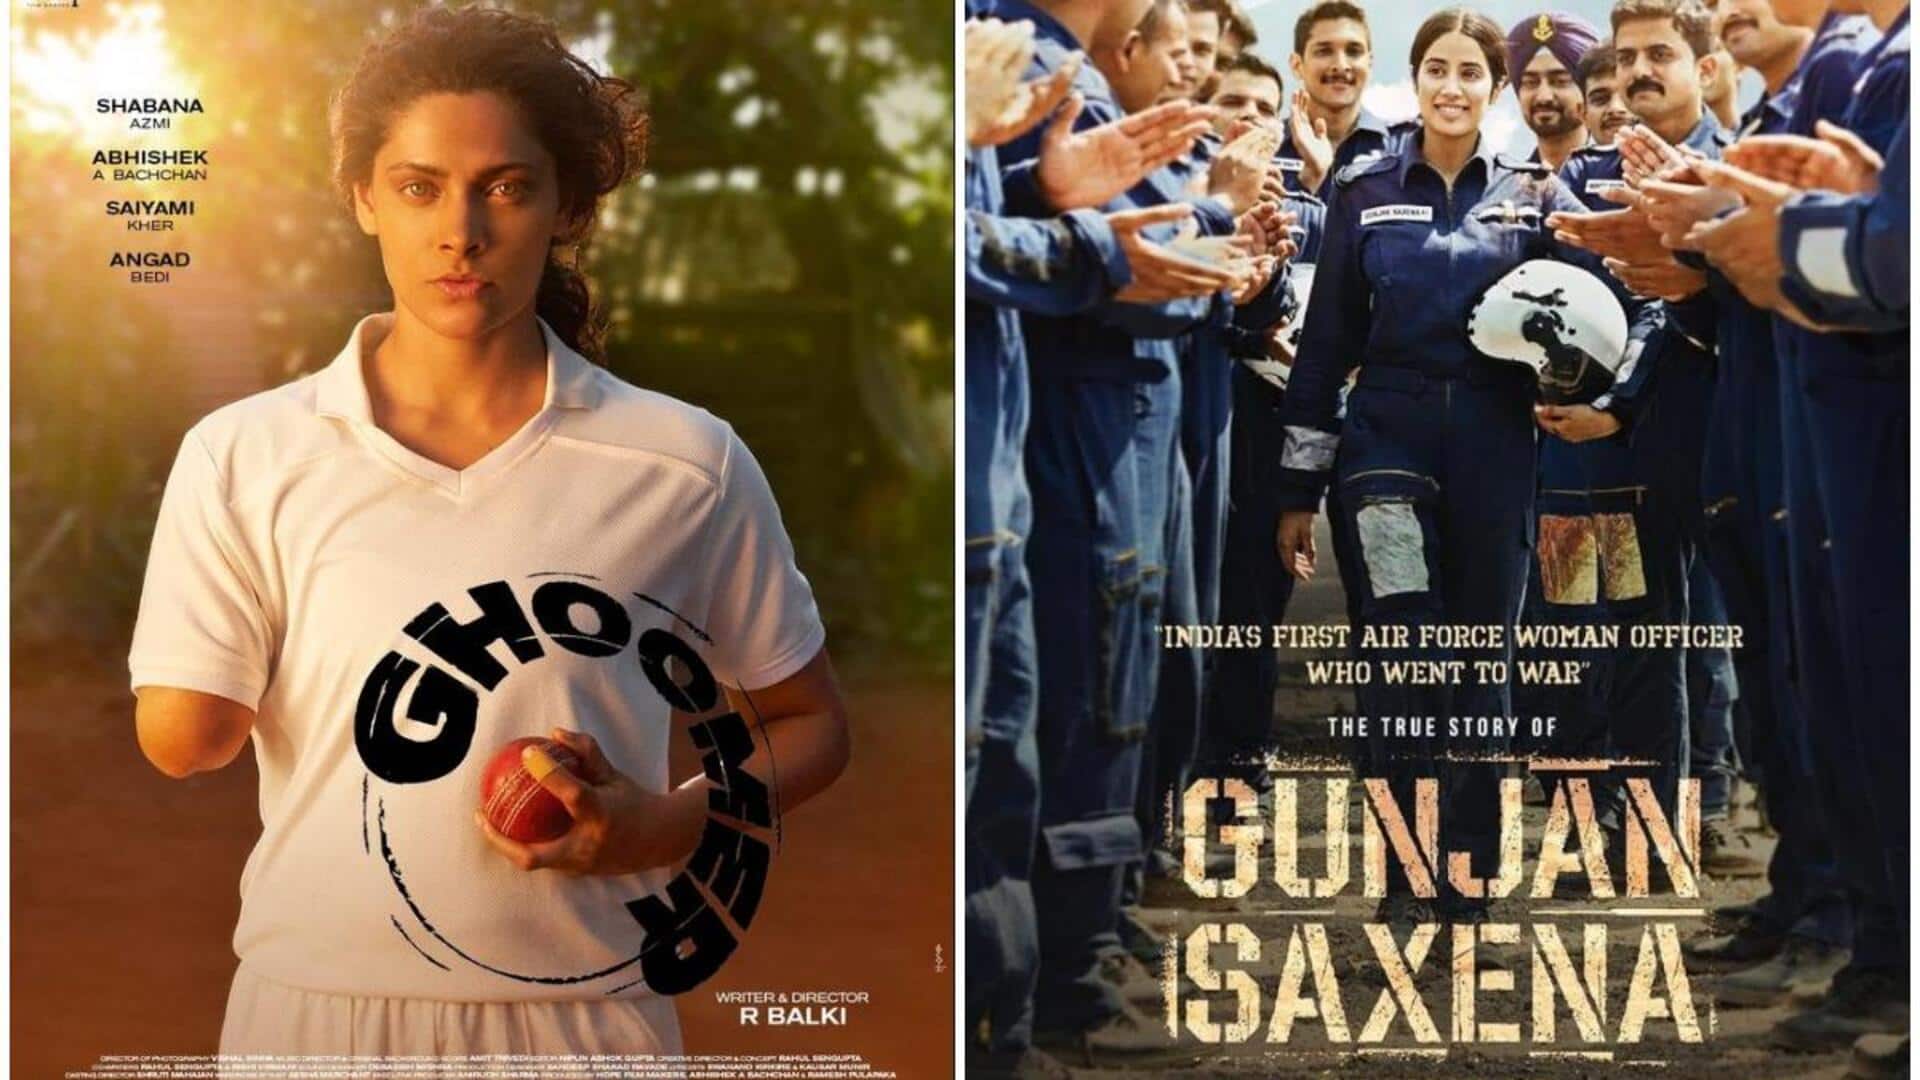 Bollywood's women-centric movies that show resilient characters